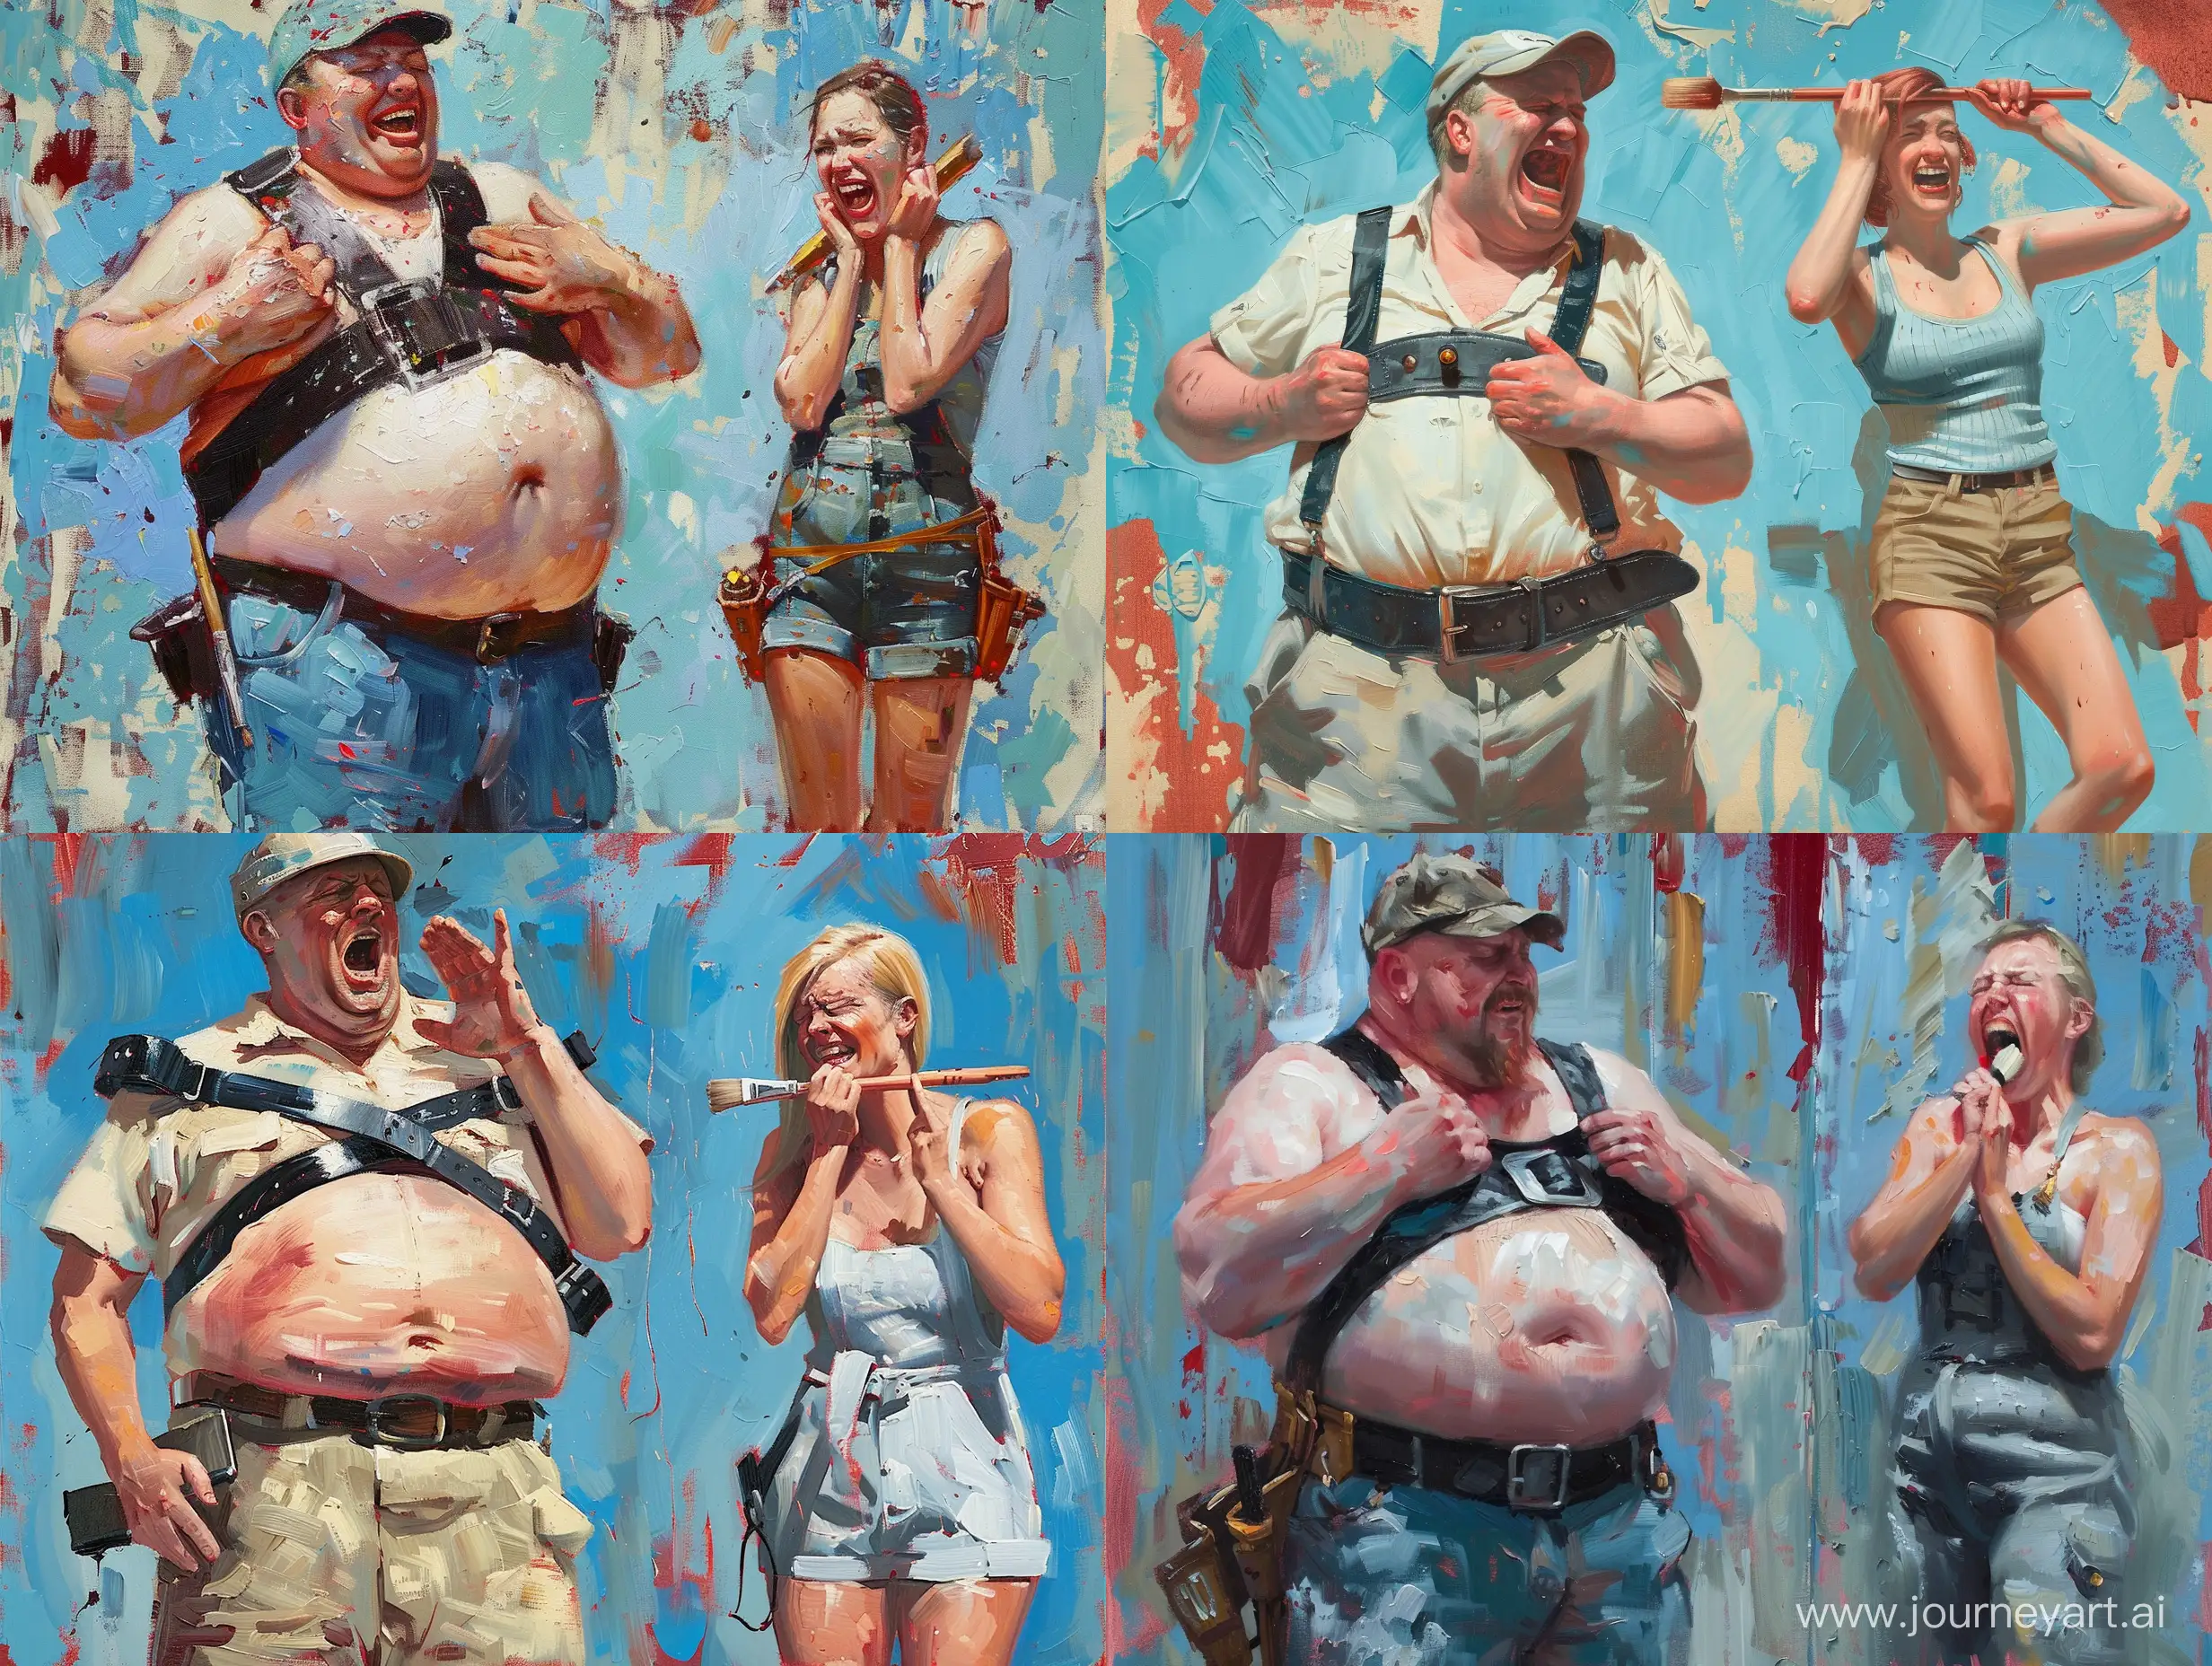 A fat white builder in a cap does not understand why he needs two thick black leather belts on his stomach, and throws up his hands. Standing nearby is a thin white female construction worker, dressed in tight overalls, holding a brush and covering her mouth with her hand from laughter. The painting has a light playful character, good detail, blue and red tones.